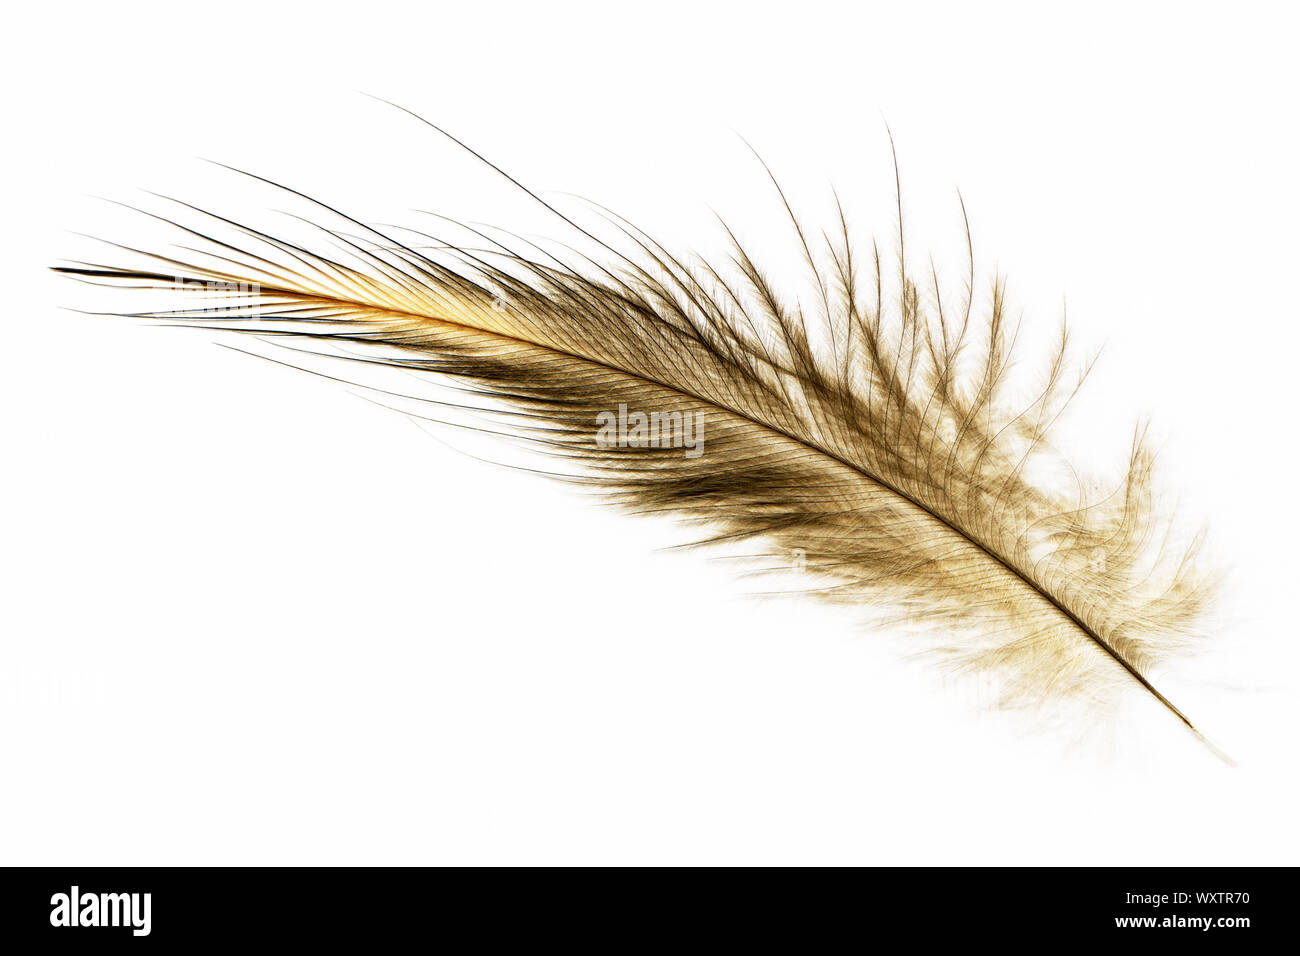 Brown Feathers As A Background Stock Photo, Picture and Royalty Free Image.  Image 33791617.